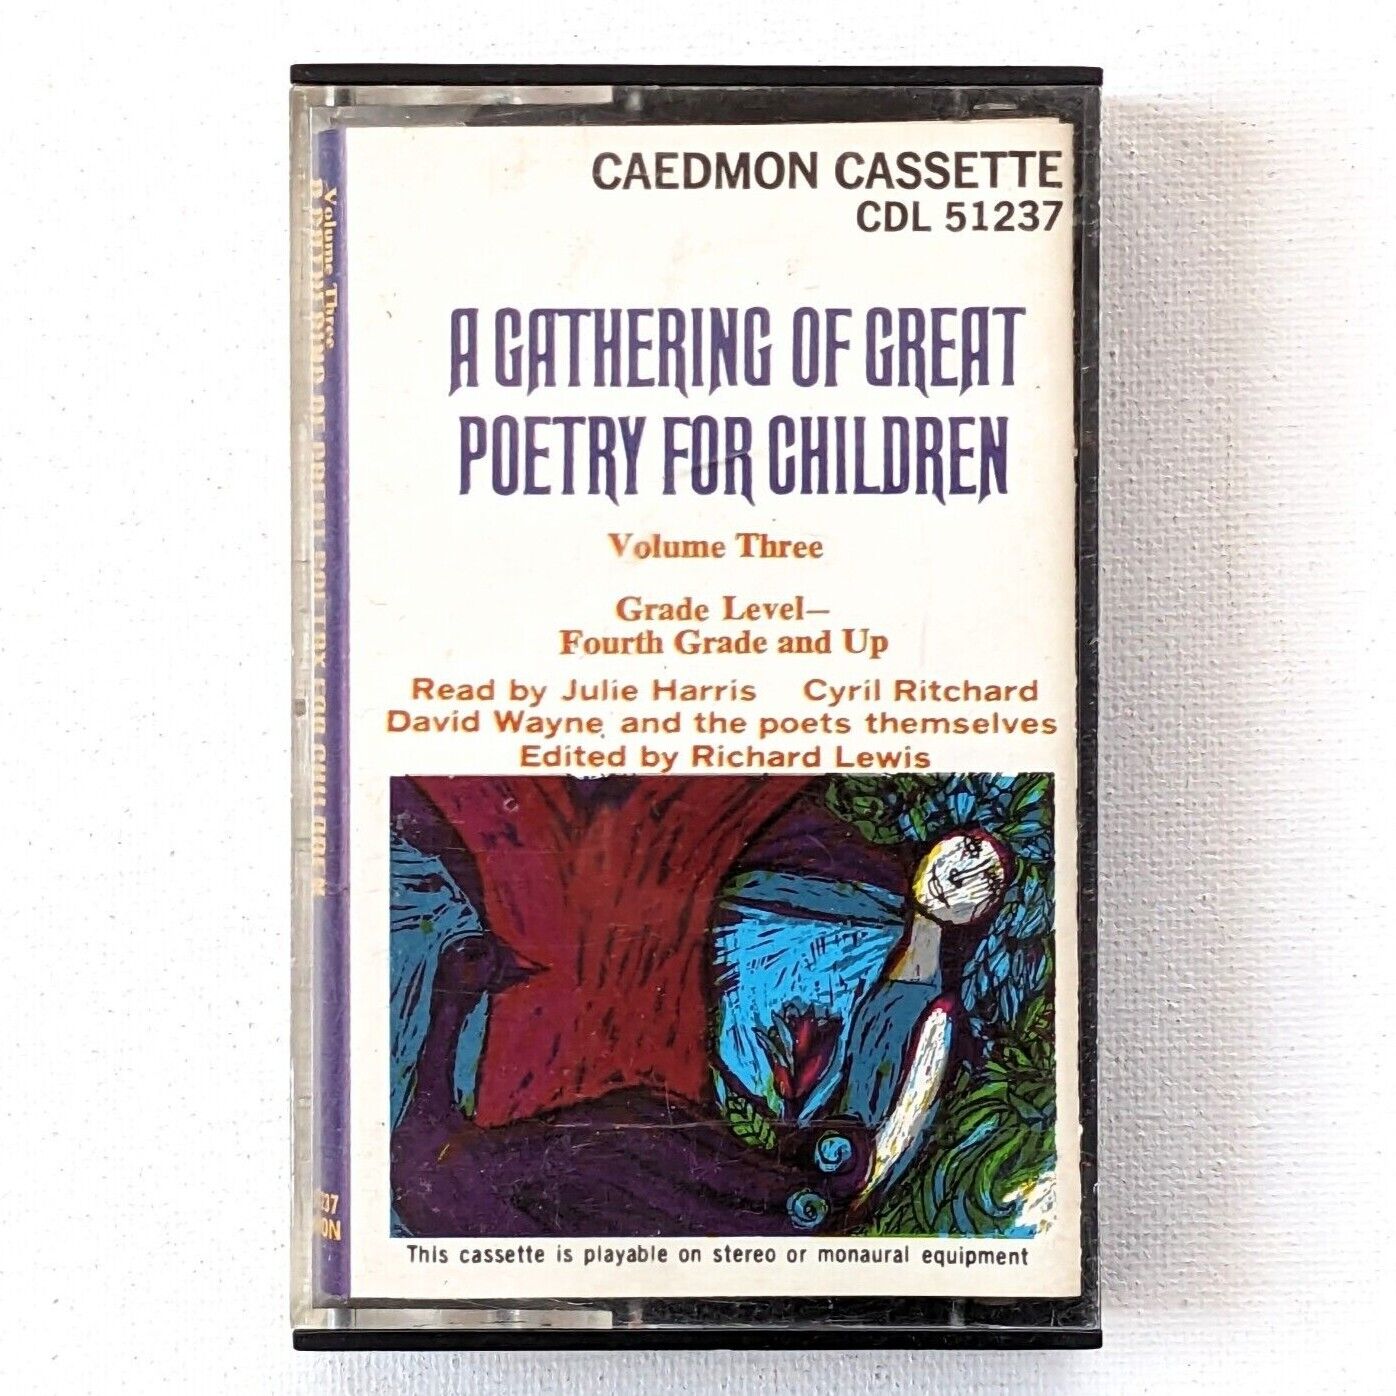 A Gathering Of Great Poetry For Children Vol. 3 1967 Caedmon Rare Cassette VG+